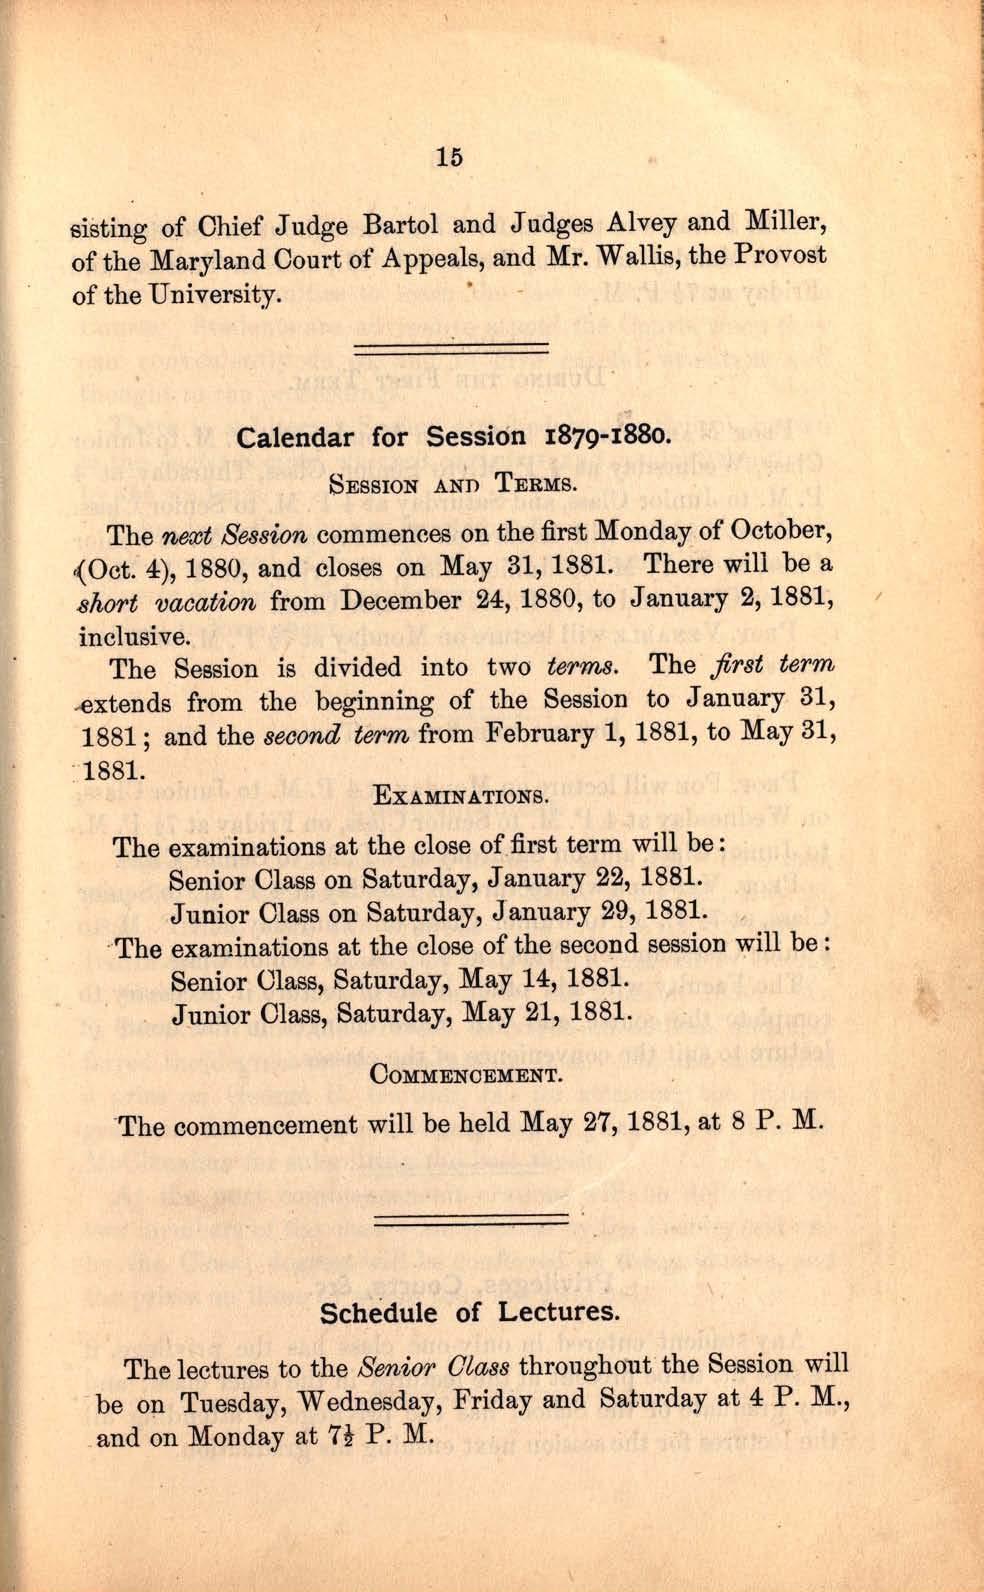 15 eisting of Chief Judge Bartol and Judges Alvey and Miller, of the Maryland Court of Appeals, and Mr. Wallis, the Provost of the University. Calendar for Session 1879-1880. SESSION AND TERMS.